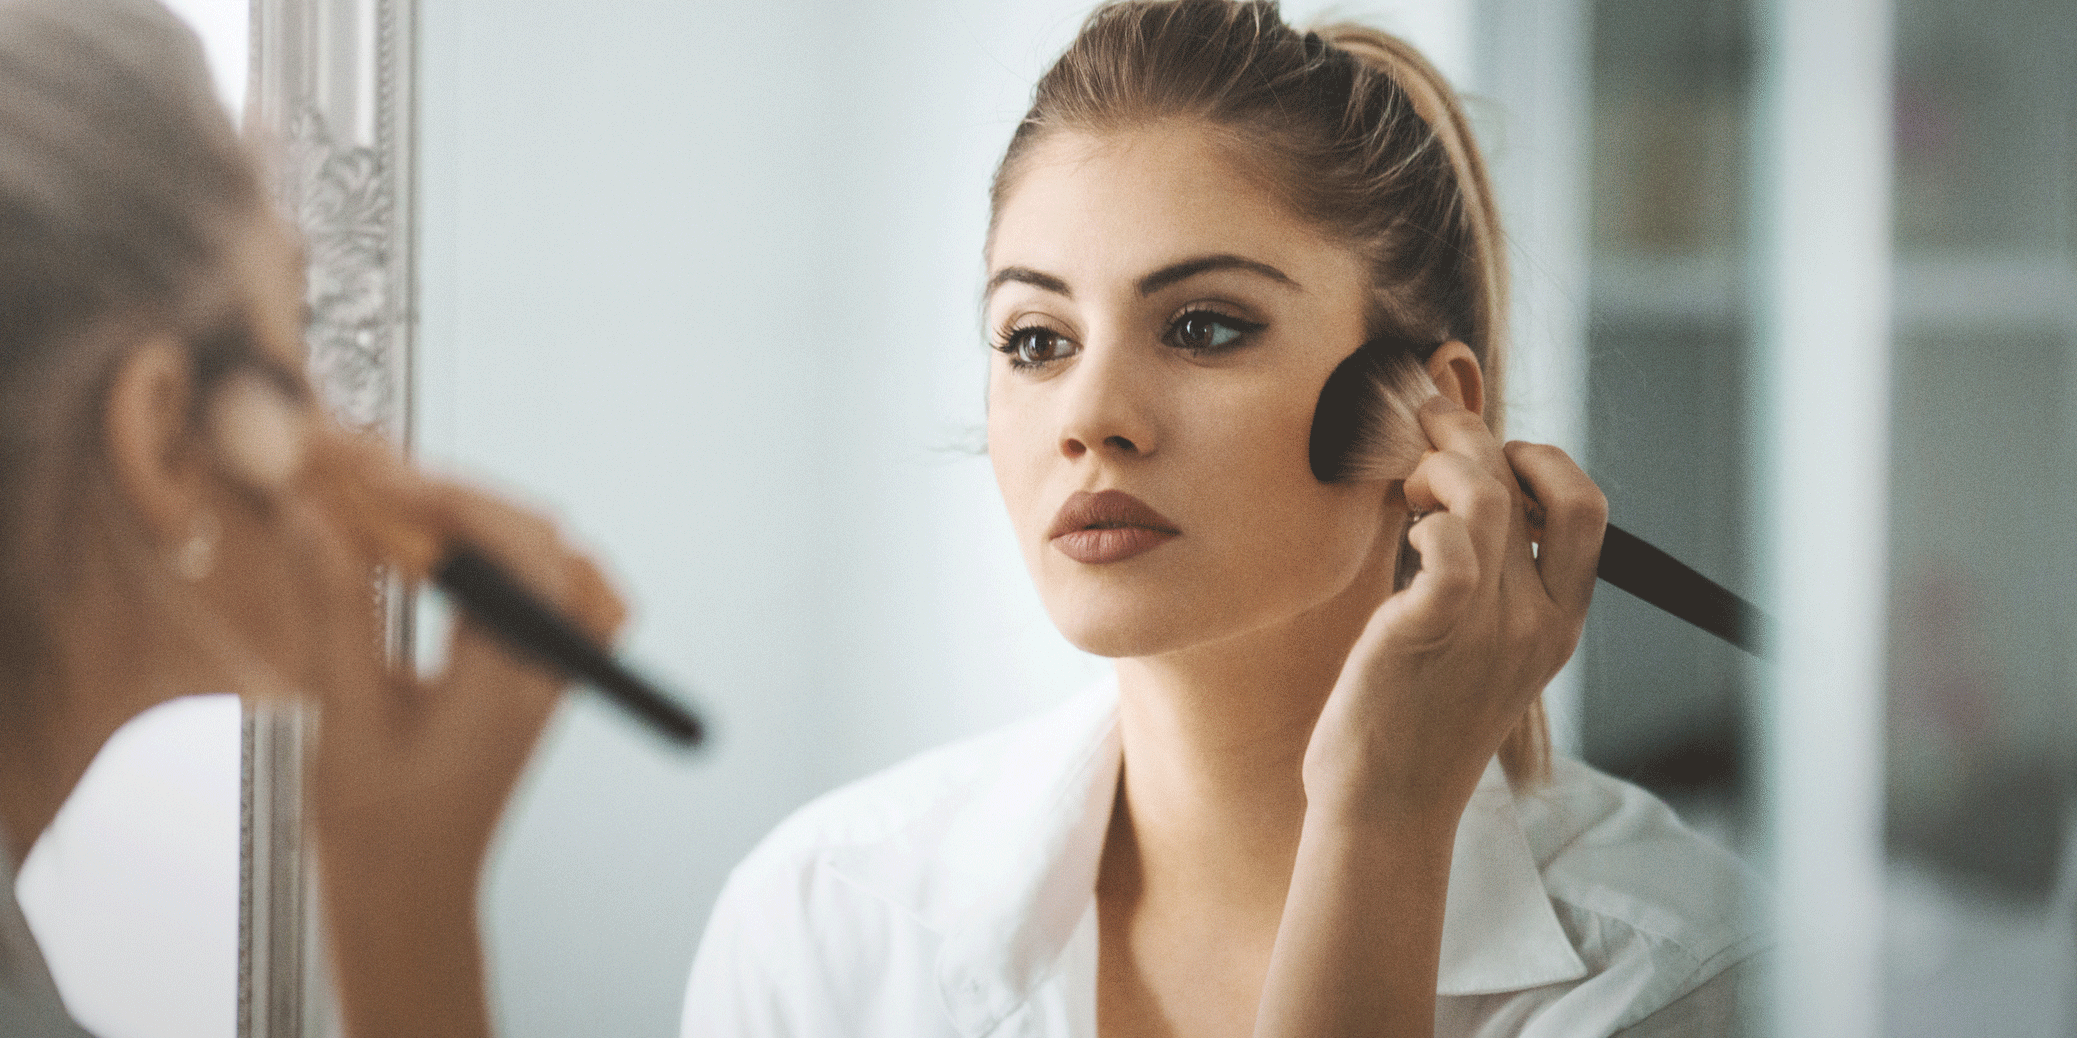 Study suggests that women wearing heavier makeup are perceived as